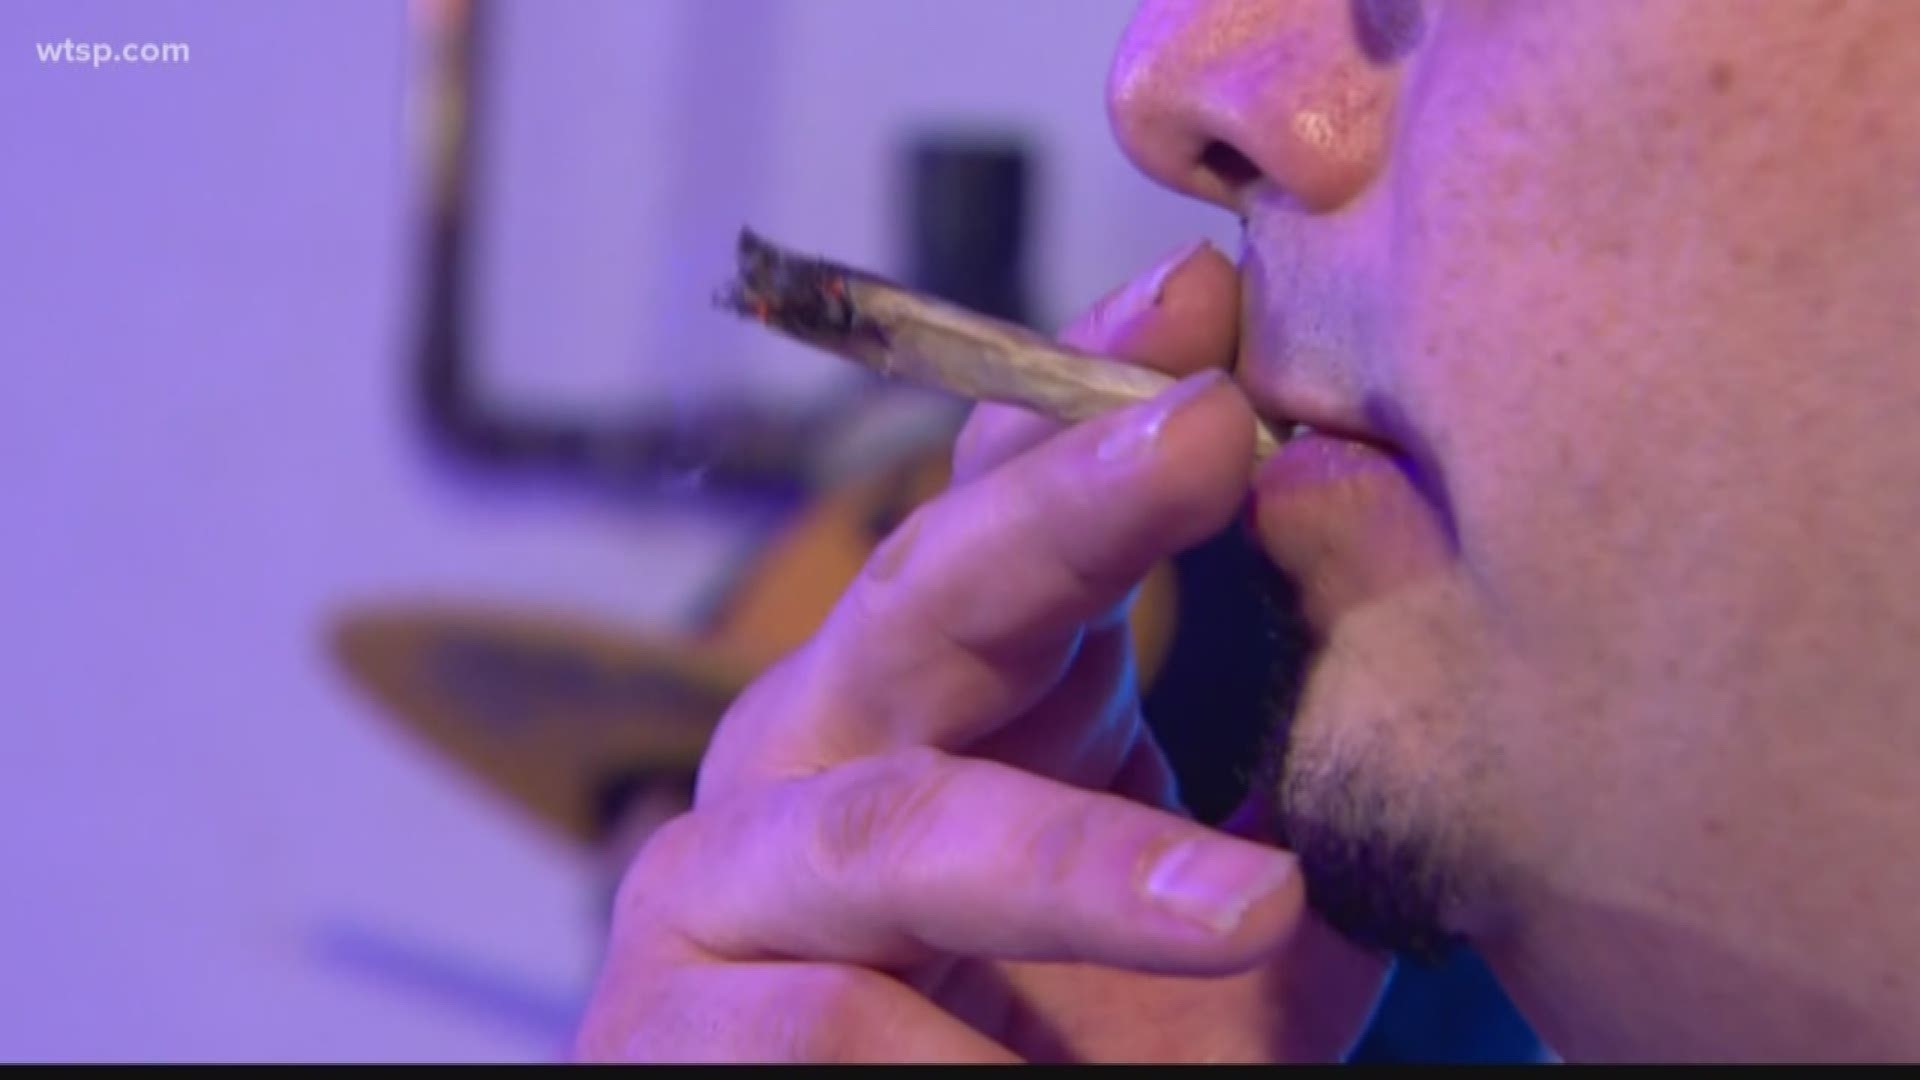 The city of Sarasota has decriminalized marijuana possession for less than 20 grams of the illegal drug. 

City commissioners passed the ordinance with a unanimous 5-0 vote Tuesday night.

Under the ordinance, anyone caught with less than 20 grams will receive a civil citation of a $100 fine or 10 hours of community service.